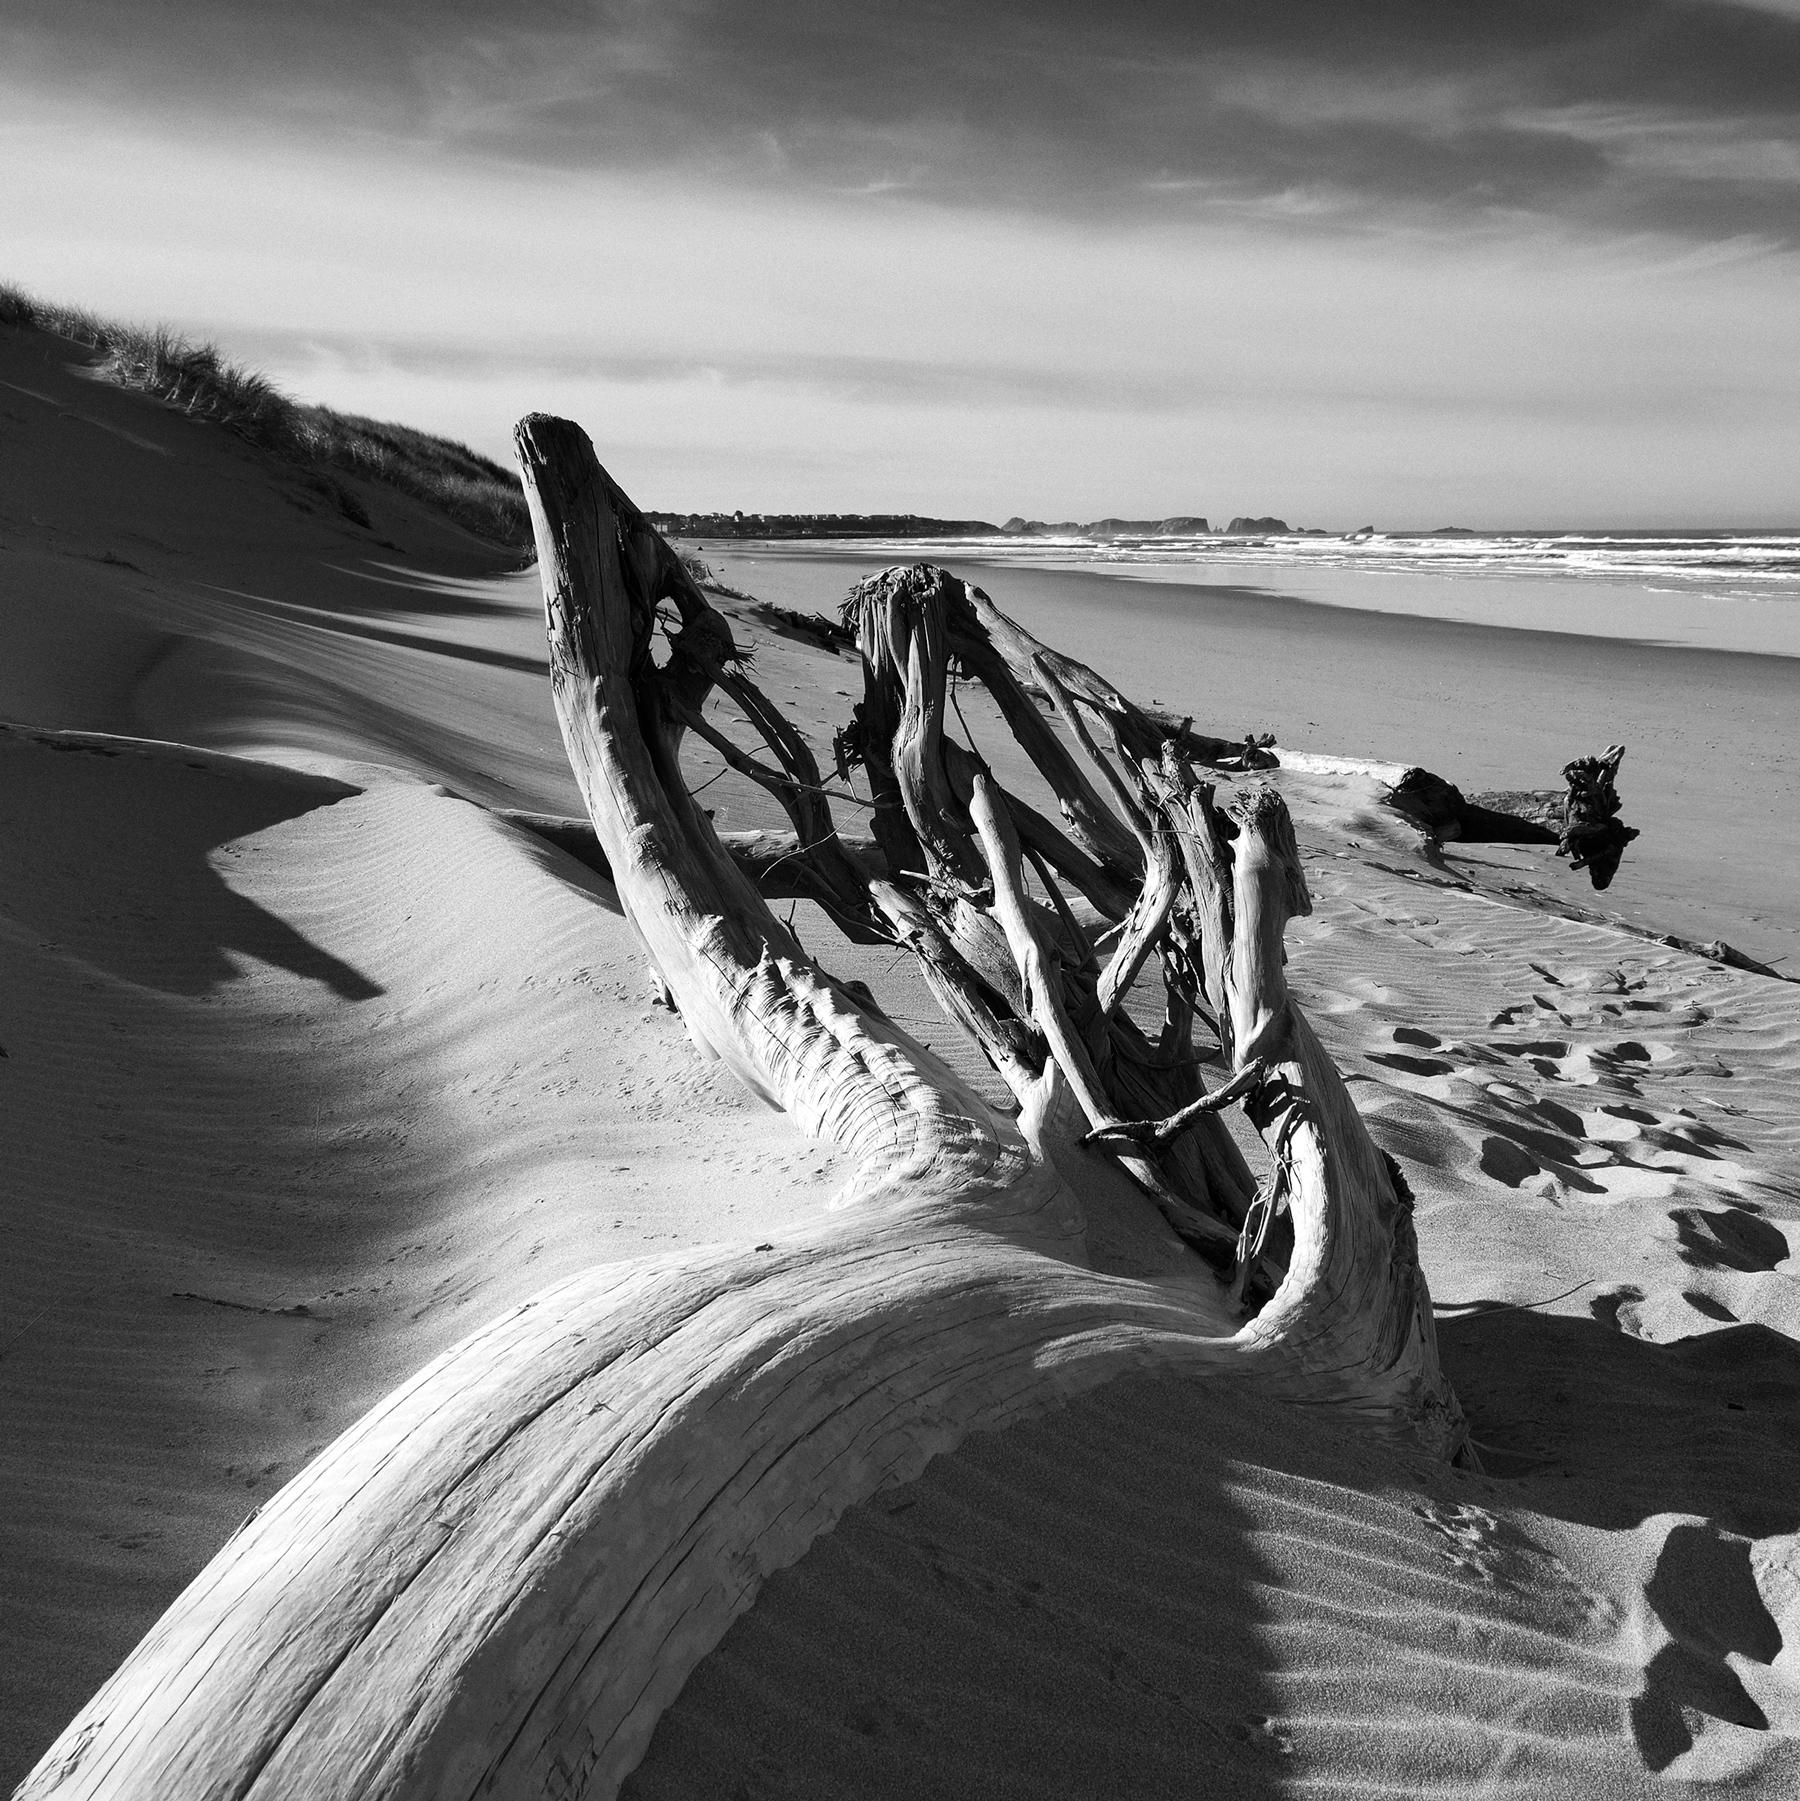 Beach Wood - contemporary black & white photography of sea, beach and wood - Photograph by Michael Götze